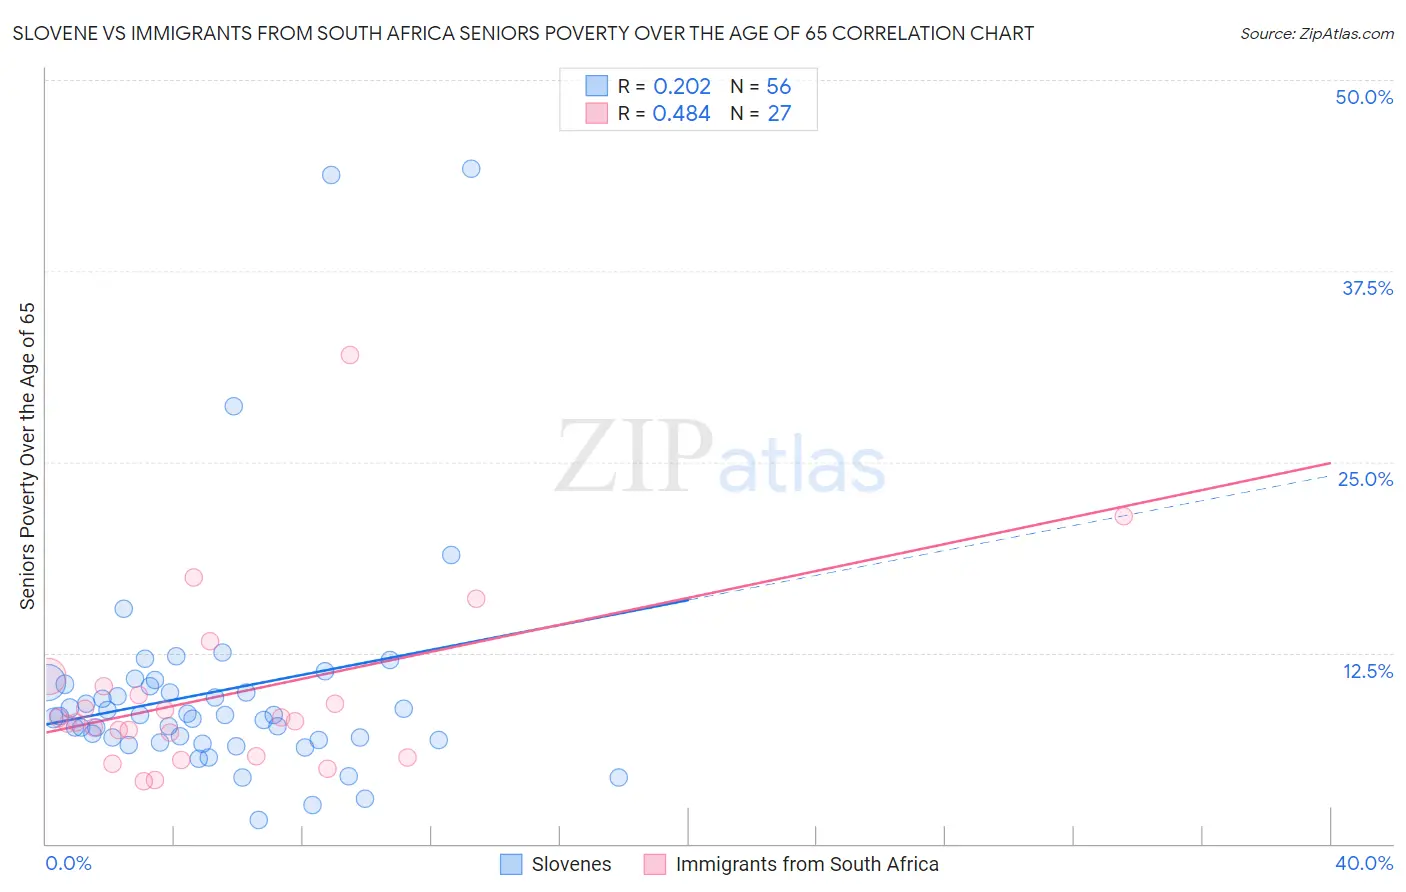 Slovene vs Immigrants from South Africa Seniors Poverty Over the Age of 65